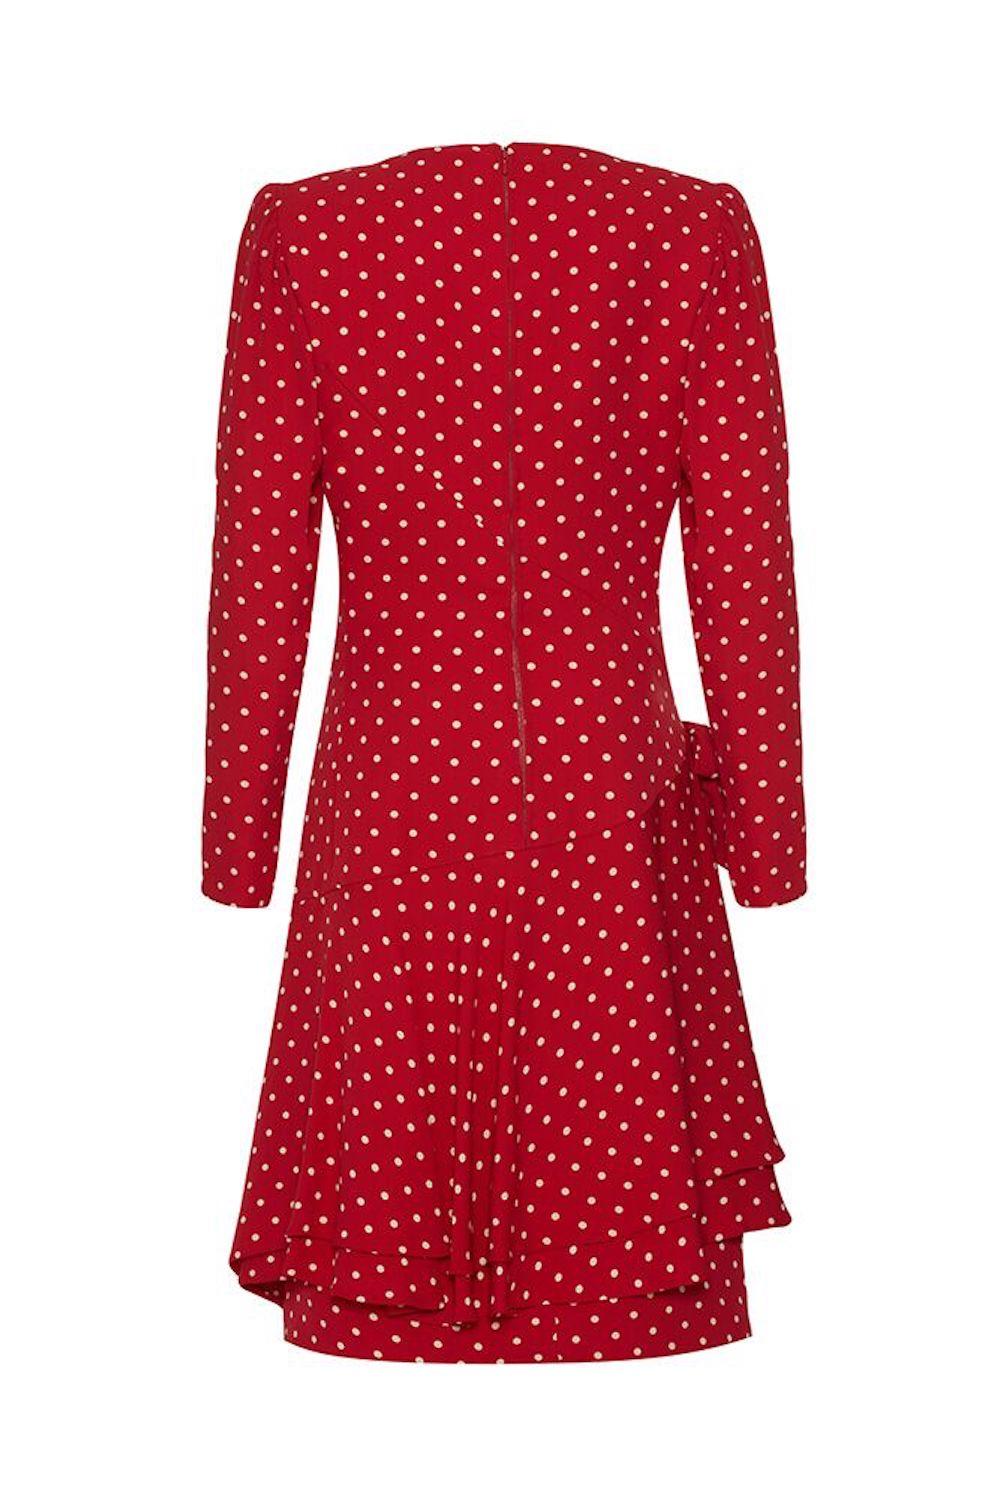 This sensational 1990s silk crepe red and white polka dot demi-couture dress is by extolled Italian designer Valentino and has superb construction with some beautifully detailed design features. The fabric is assembled into triangulated panels which